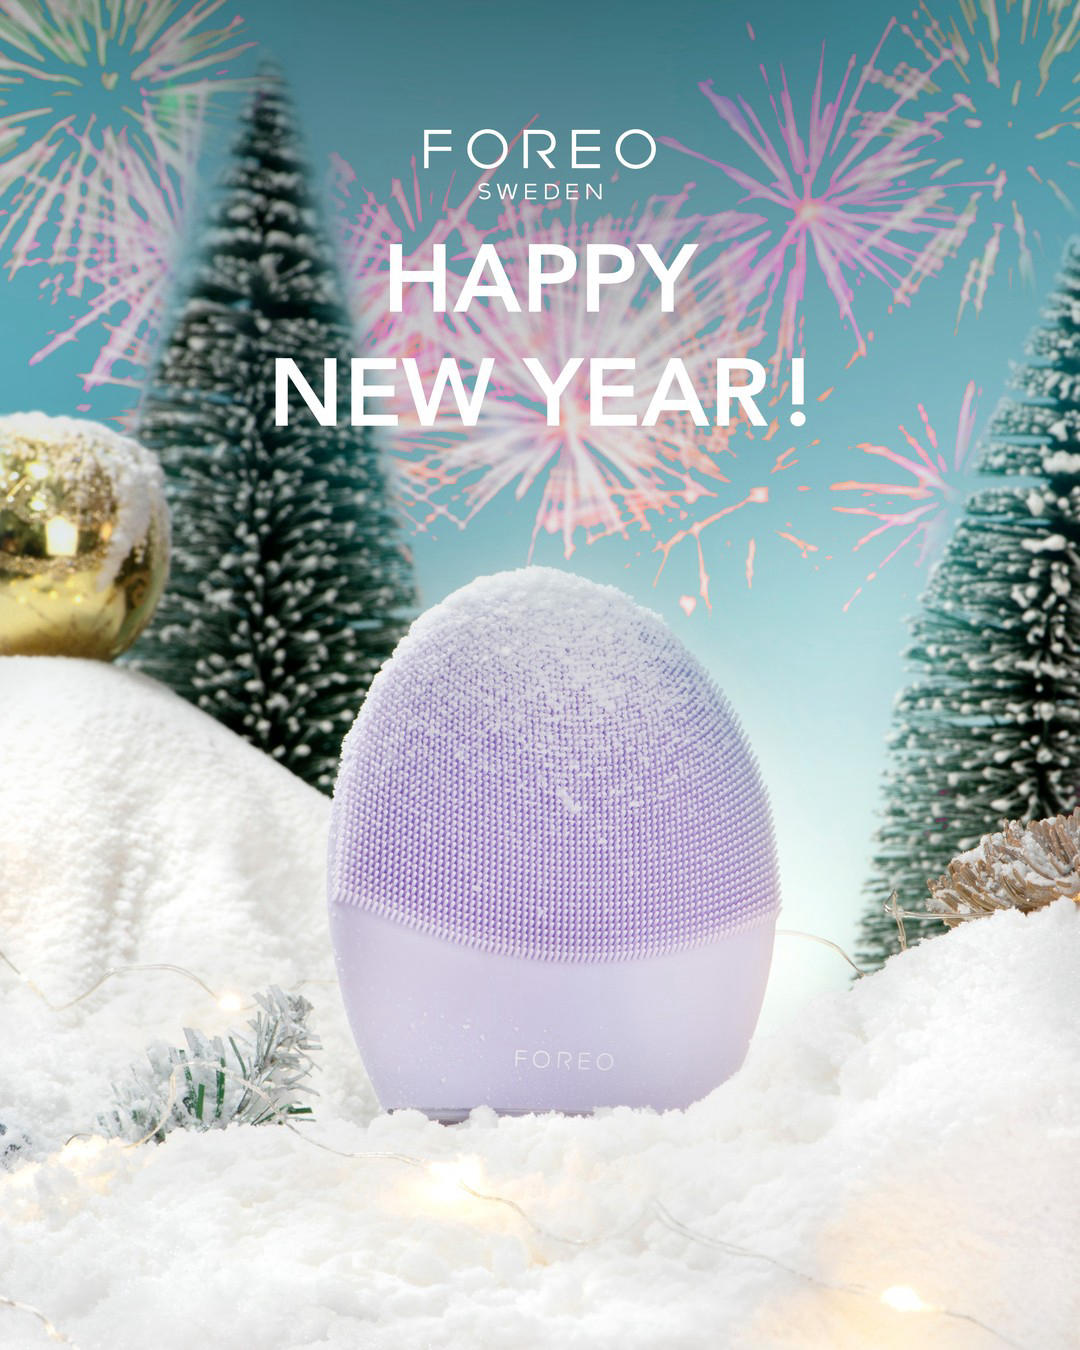 Happy New Year from all of us at FOREO